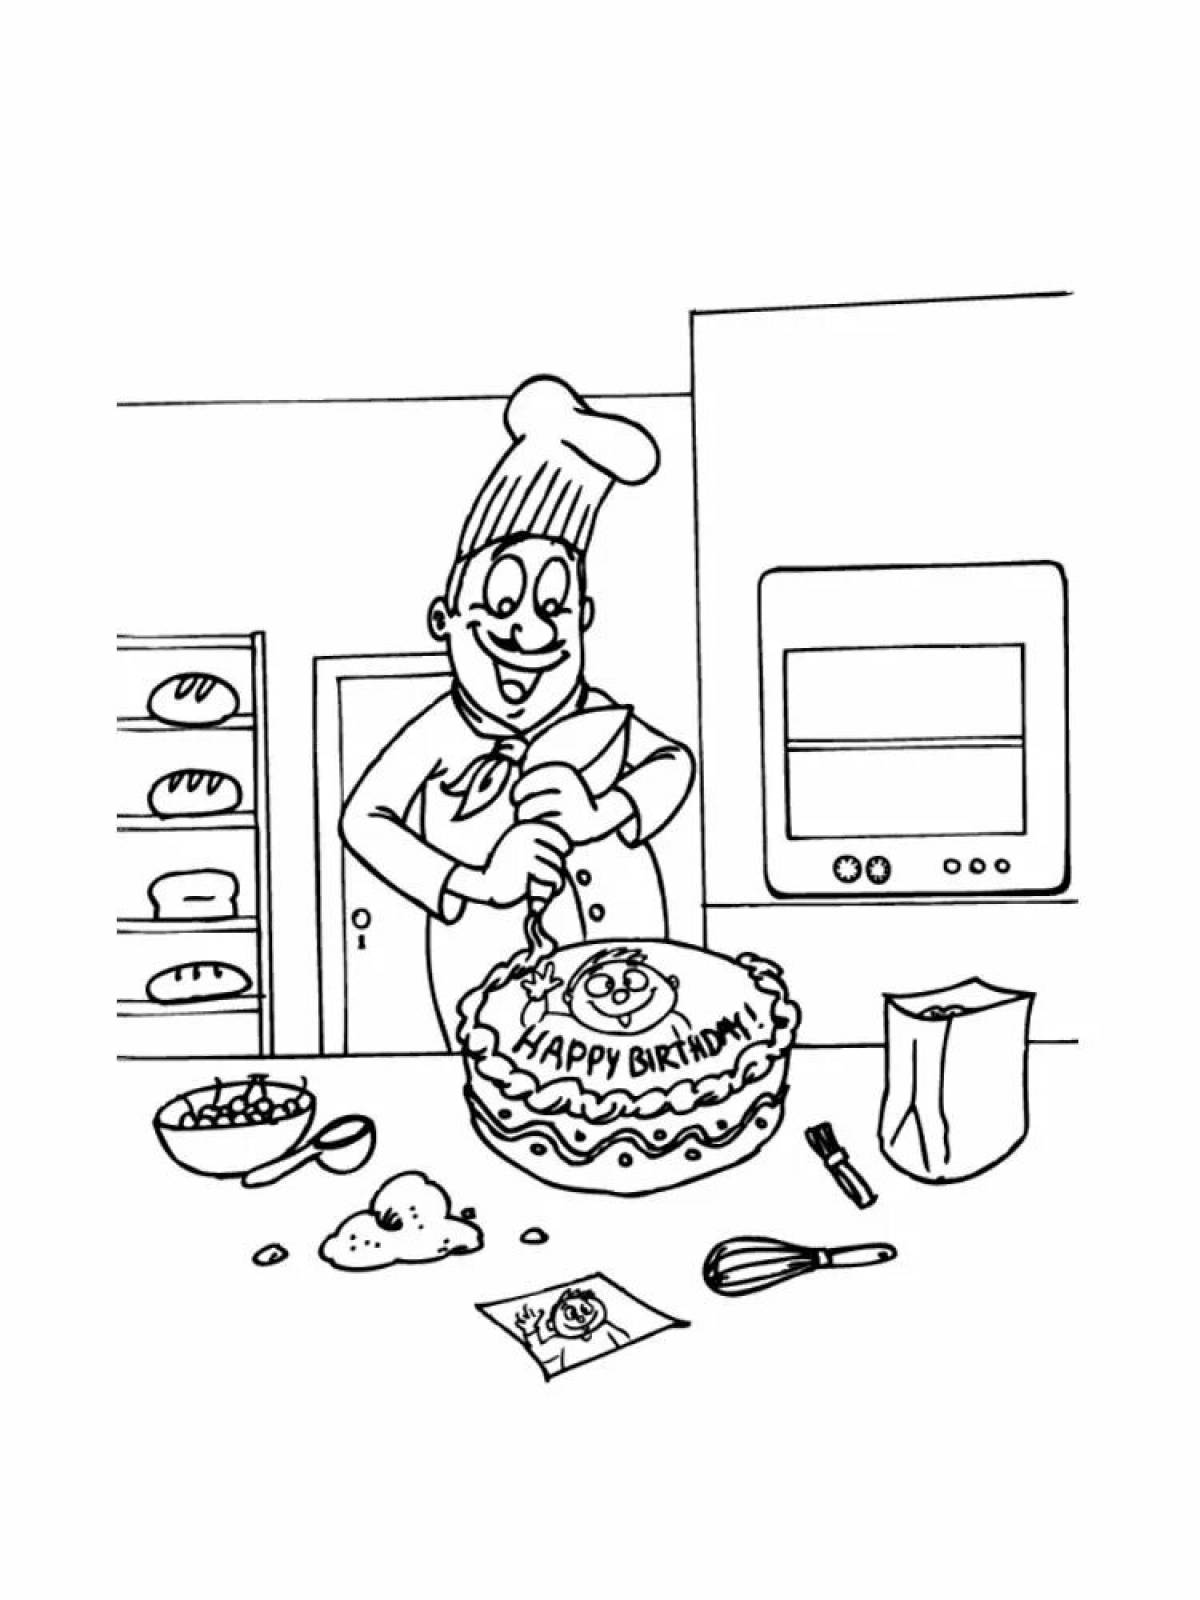 Confectioner coloring page